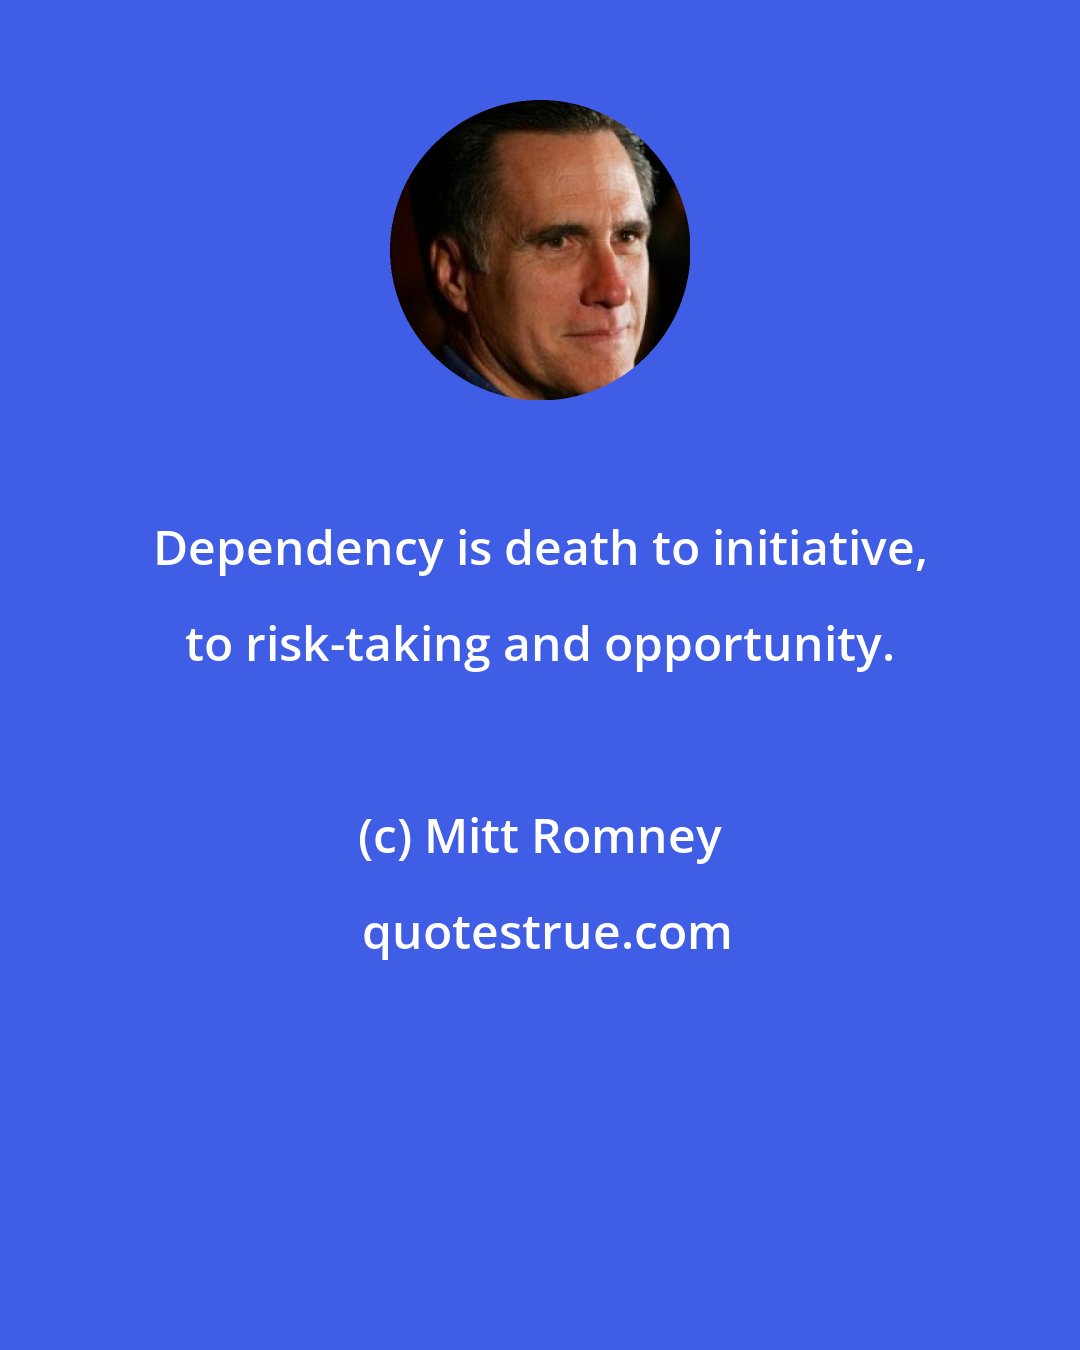 Mitt Romney: Dependency is death to initiative, to risk-taking and opportunity.